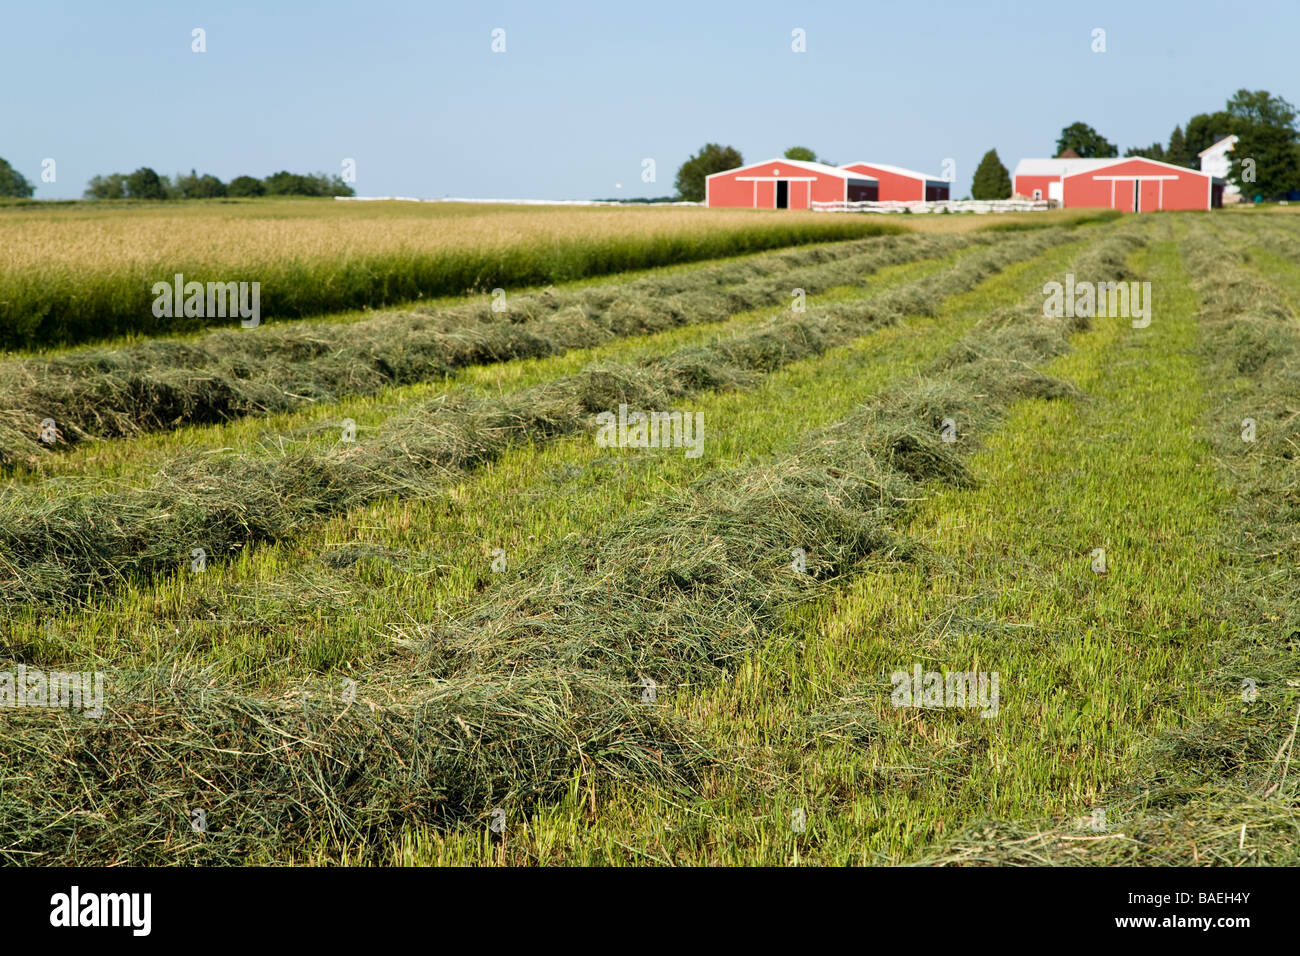 ILLINOIS DeKalb Freshly mowed hay raked into rows in agricultural field farm buildings in background Stock Photo